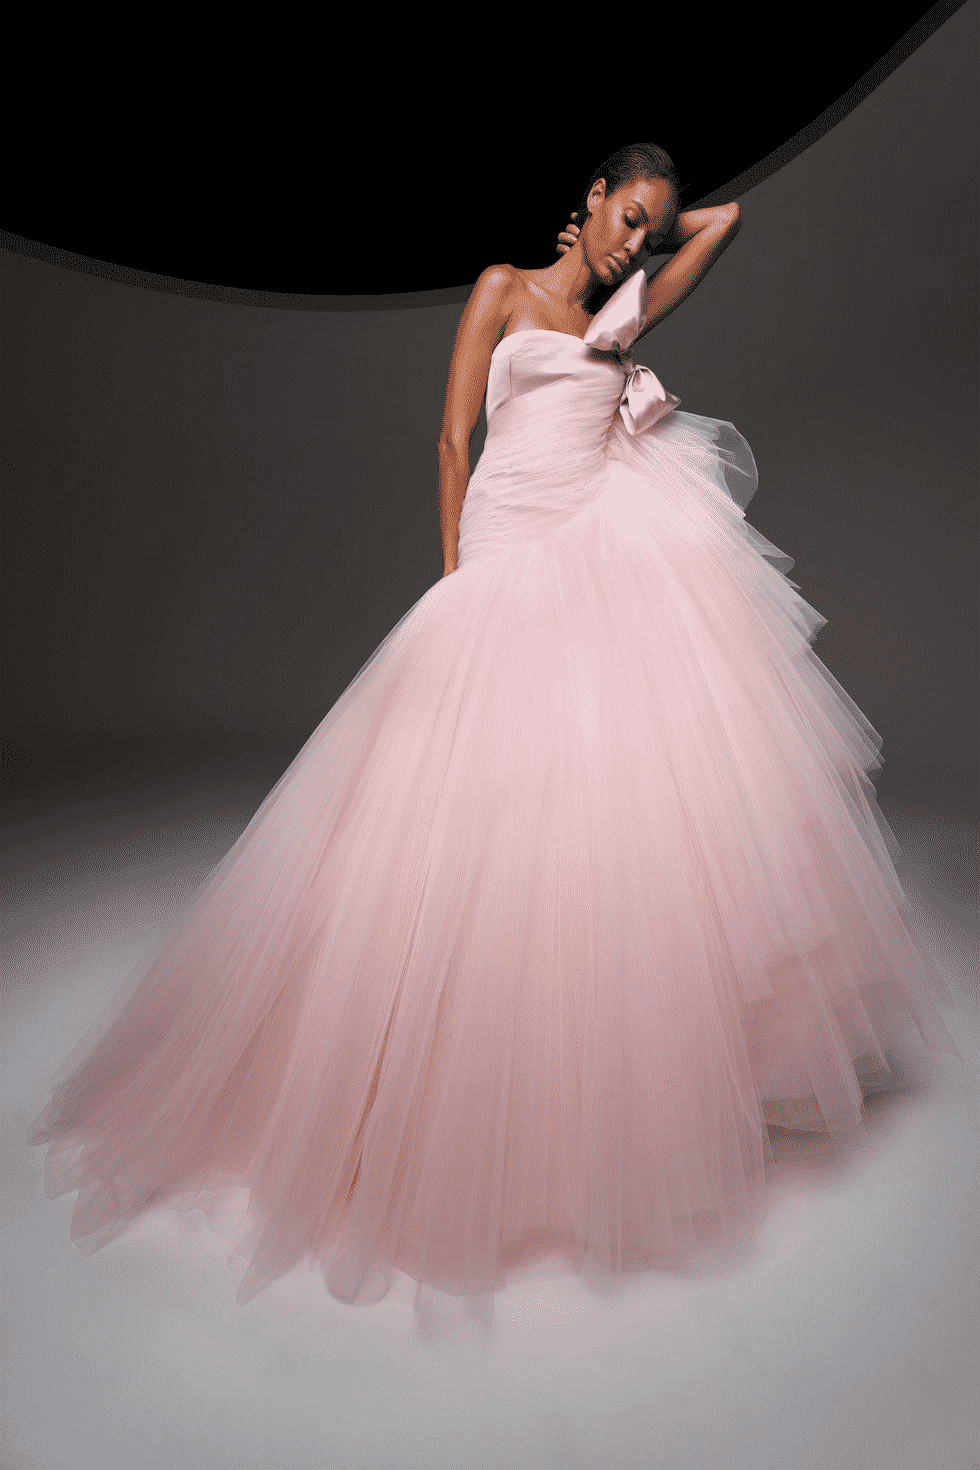 Latest Bridal Gowns 20 Most Perfect Bridal Gowns this year